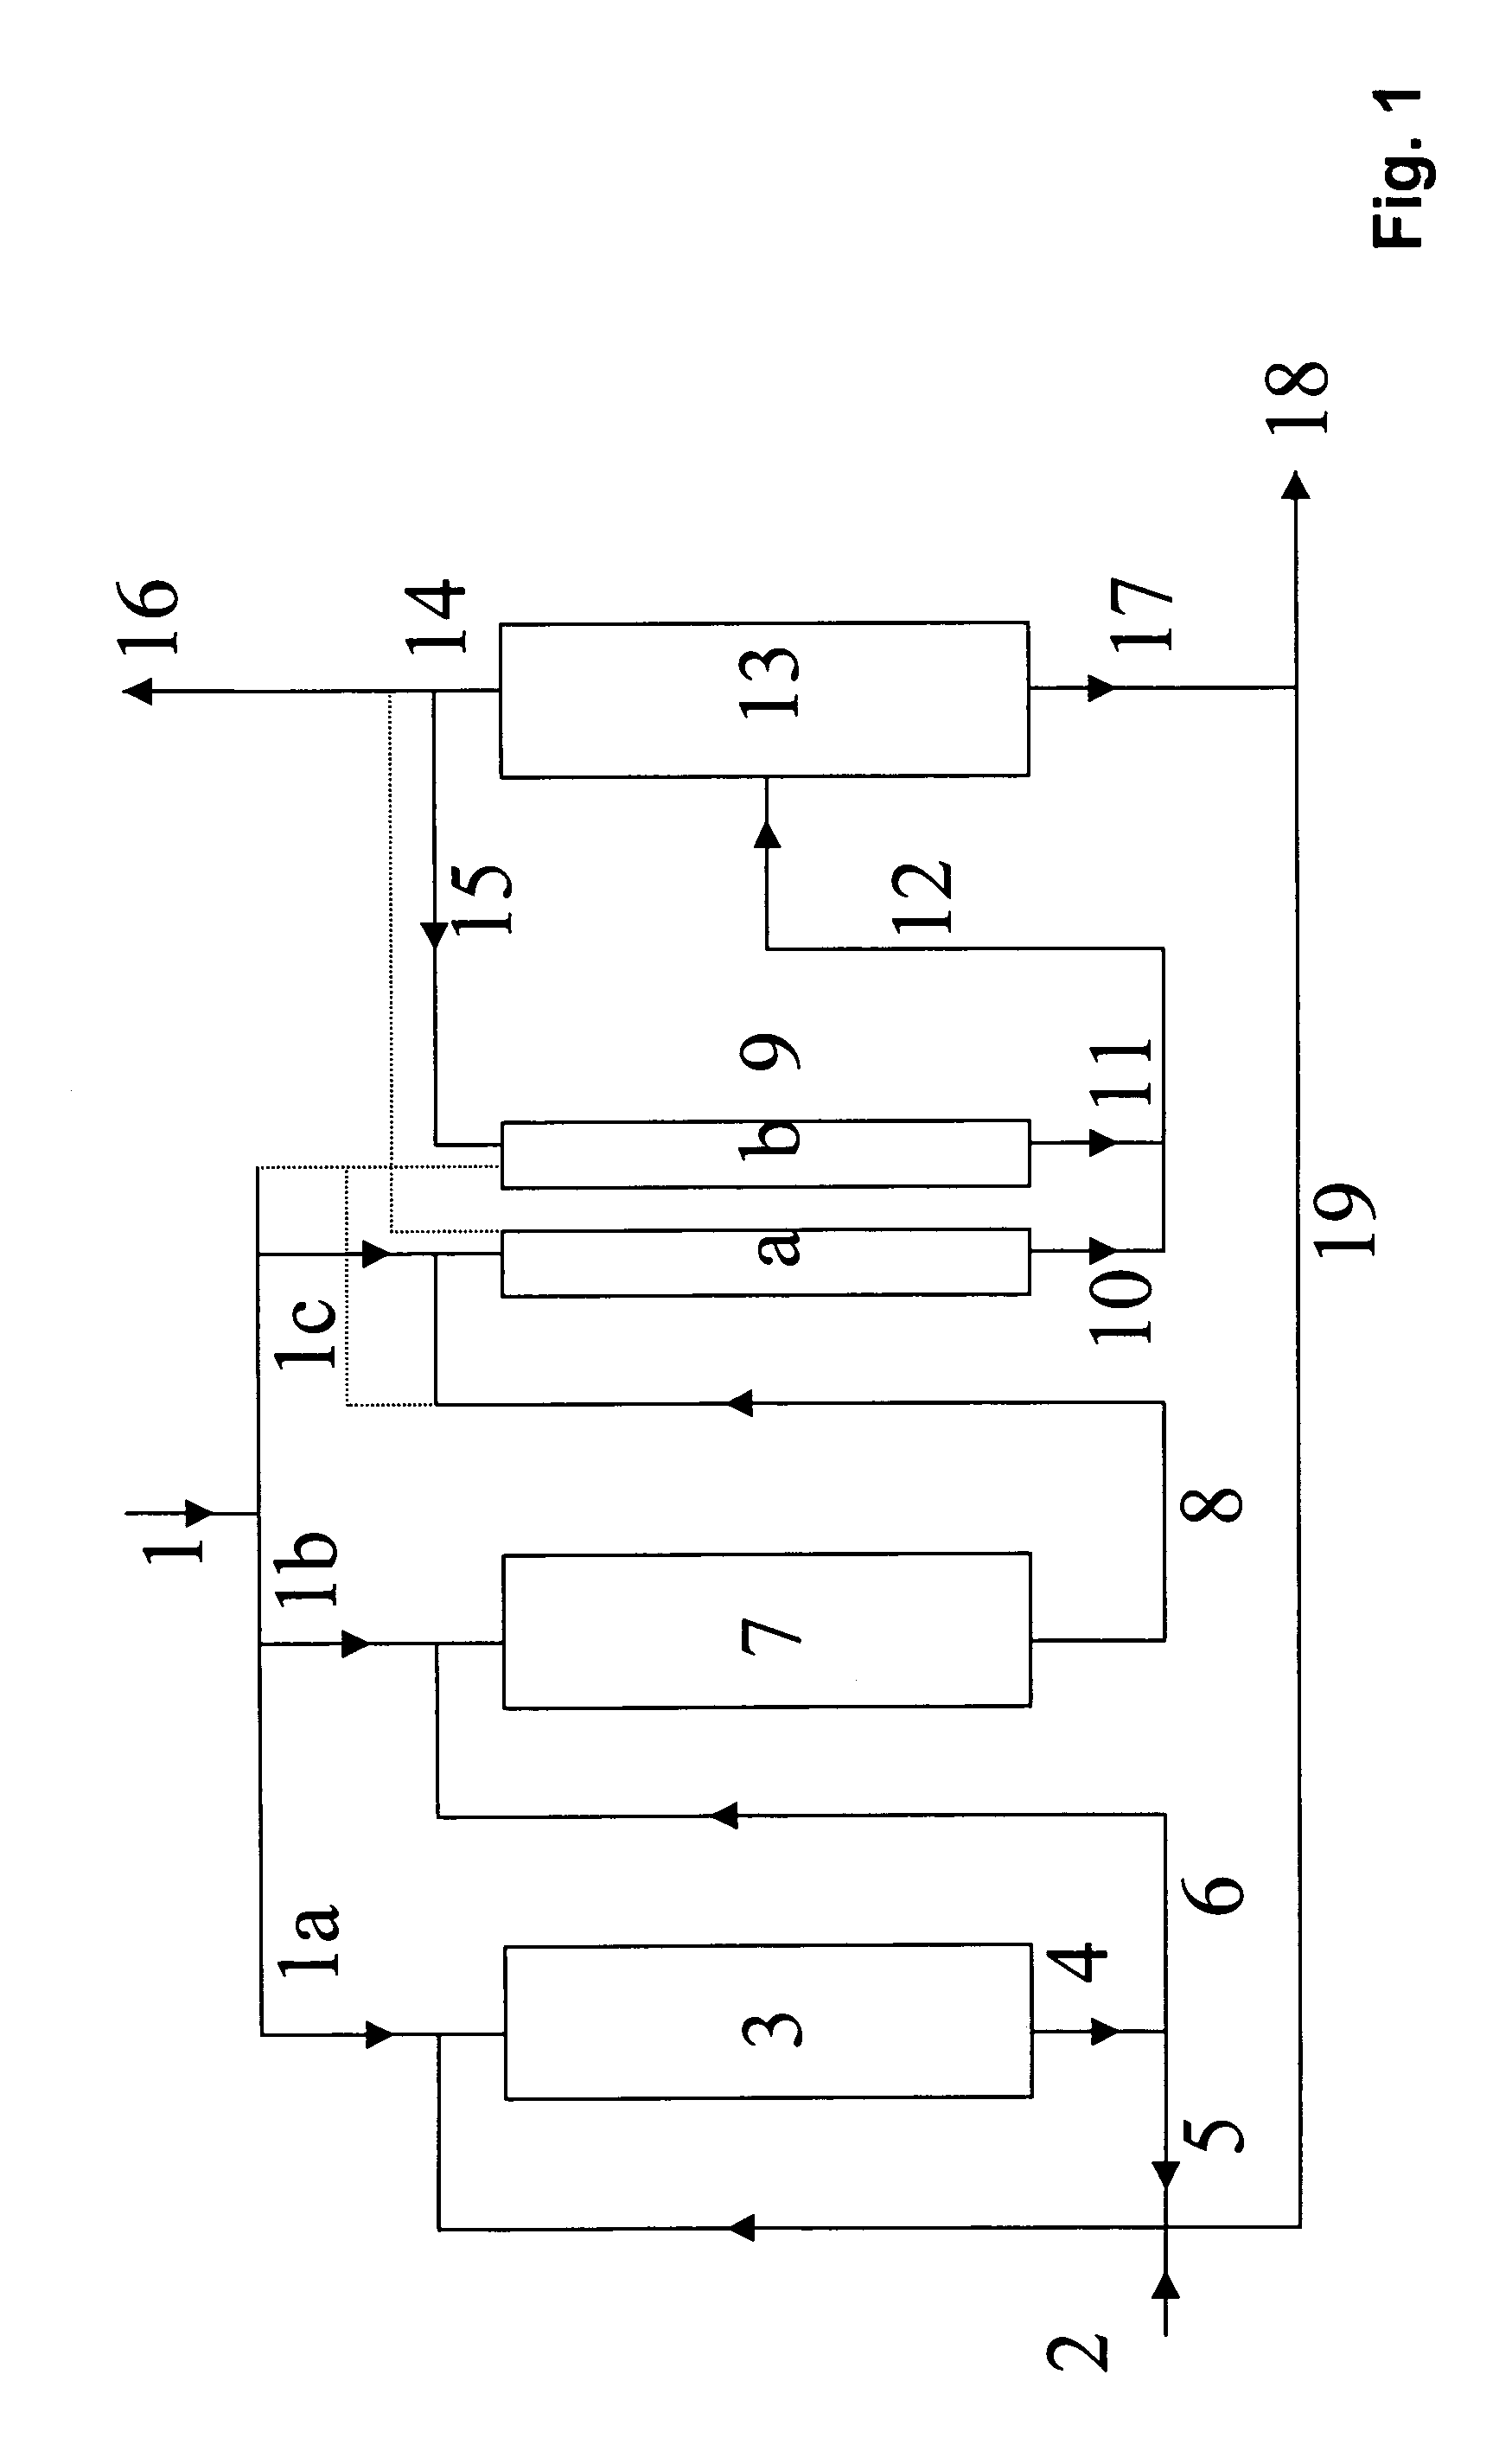 Process for preparing tert-butanol from isobutene-containing hydrocarbon mixtures